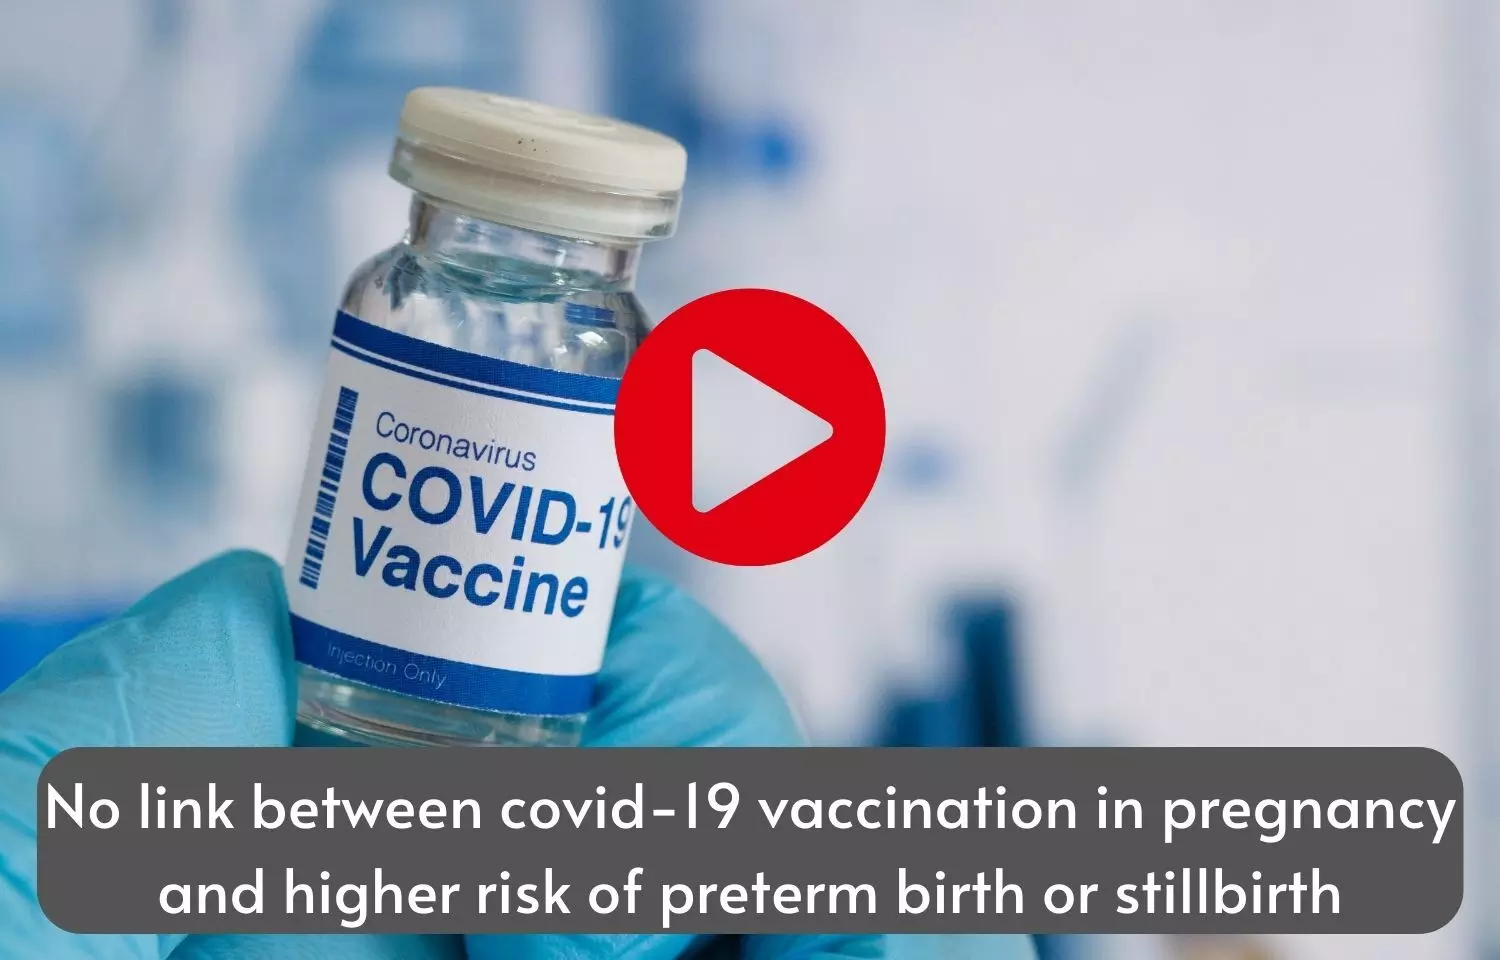 No link between COVID-19 in pregnancy and higher risk of preterm birth or stillbirth